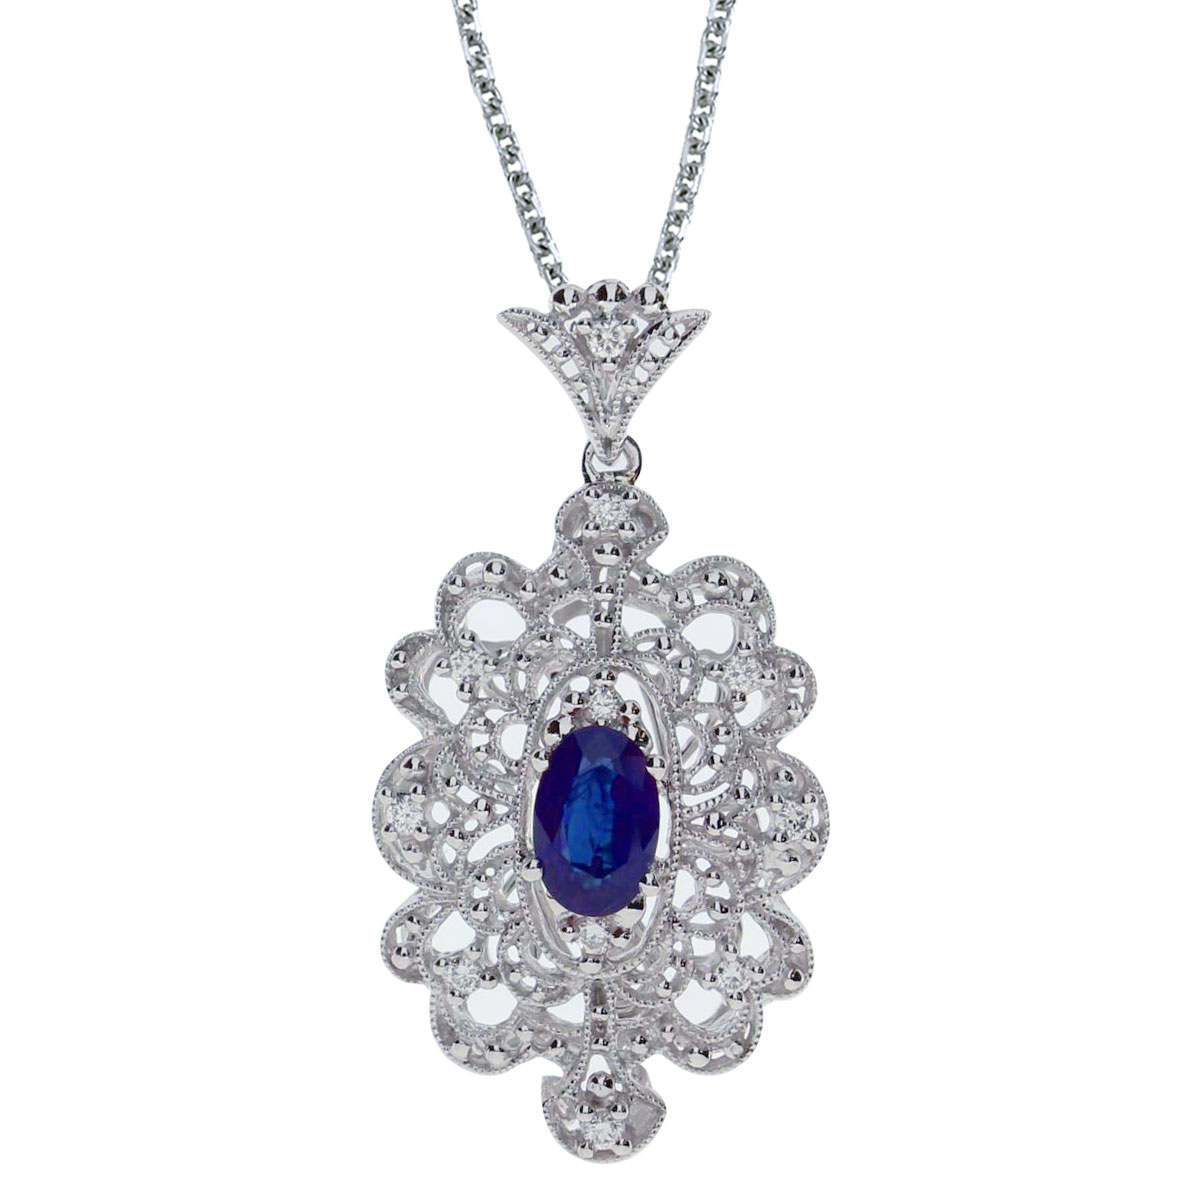 JCX2600: This beautiful 14k white gold pendant features a bright 6x4 mm oval sapphire and .10 carats of shimmering diamonds.